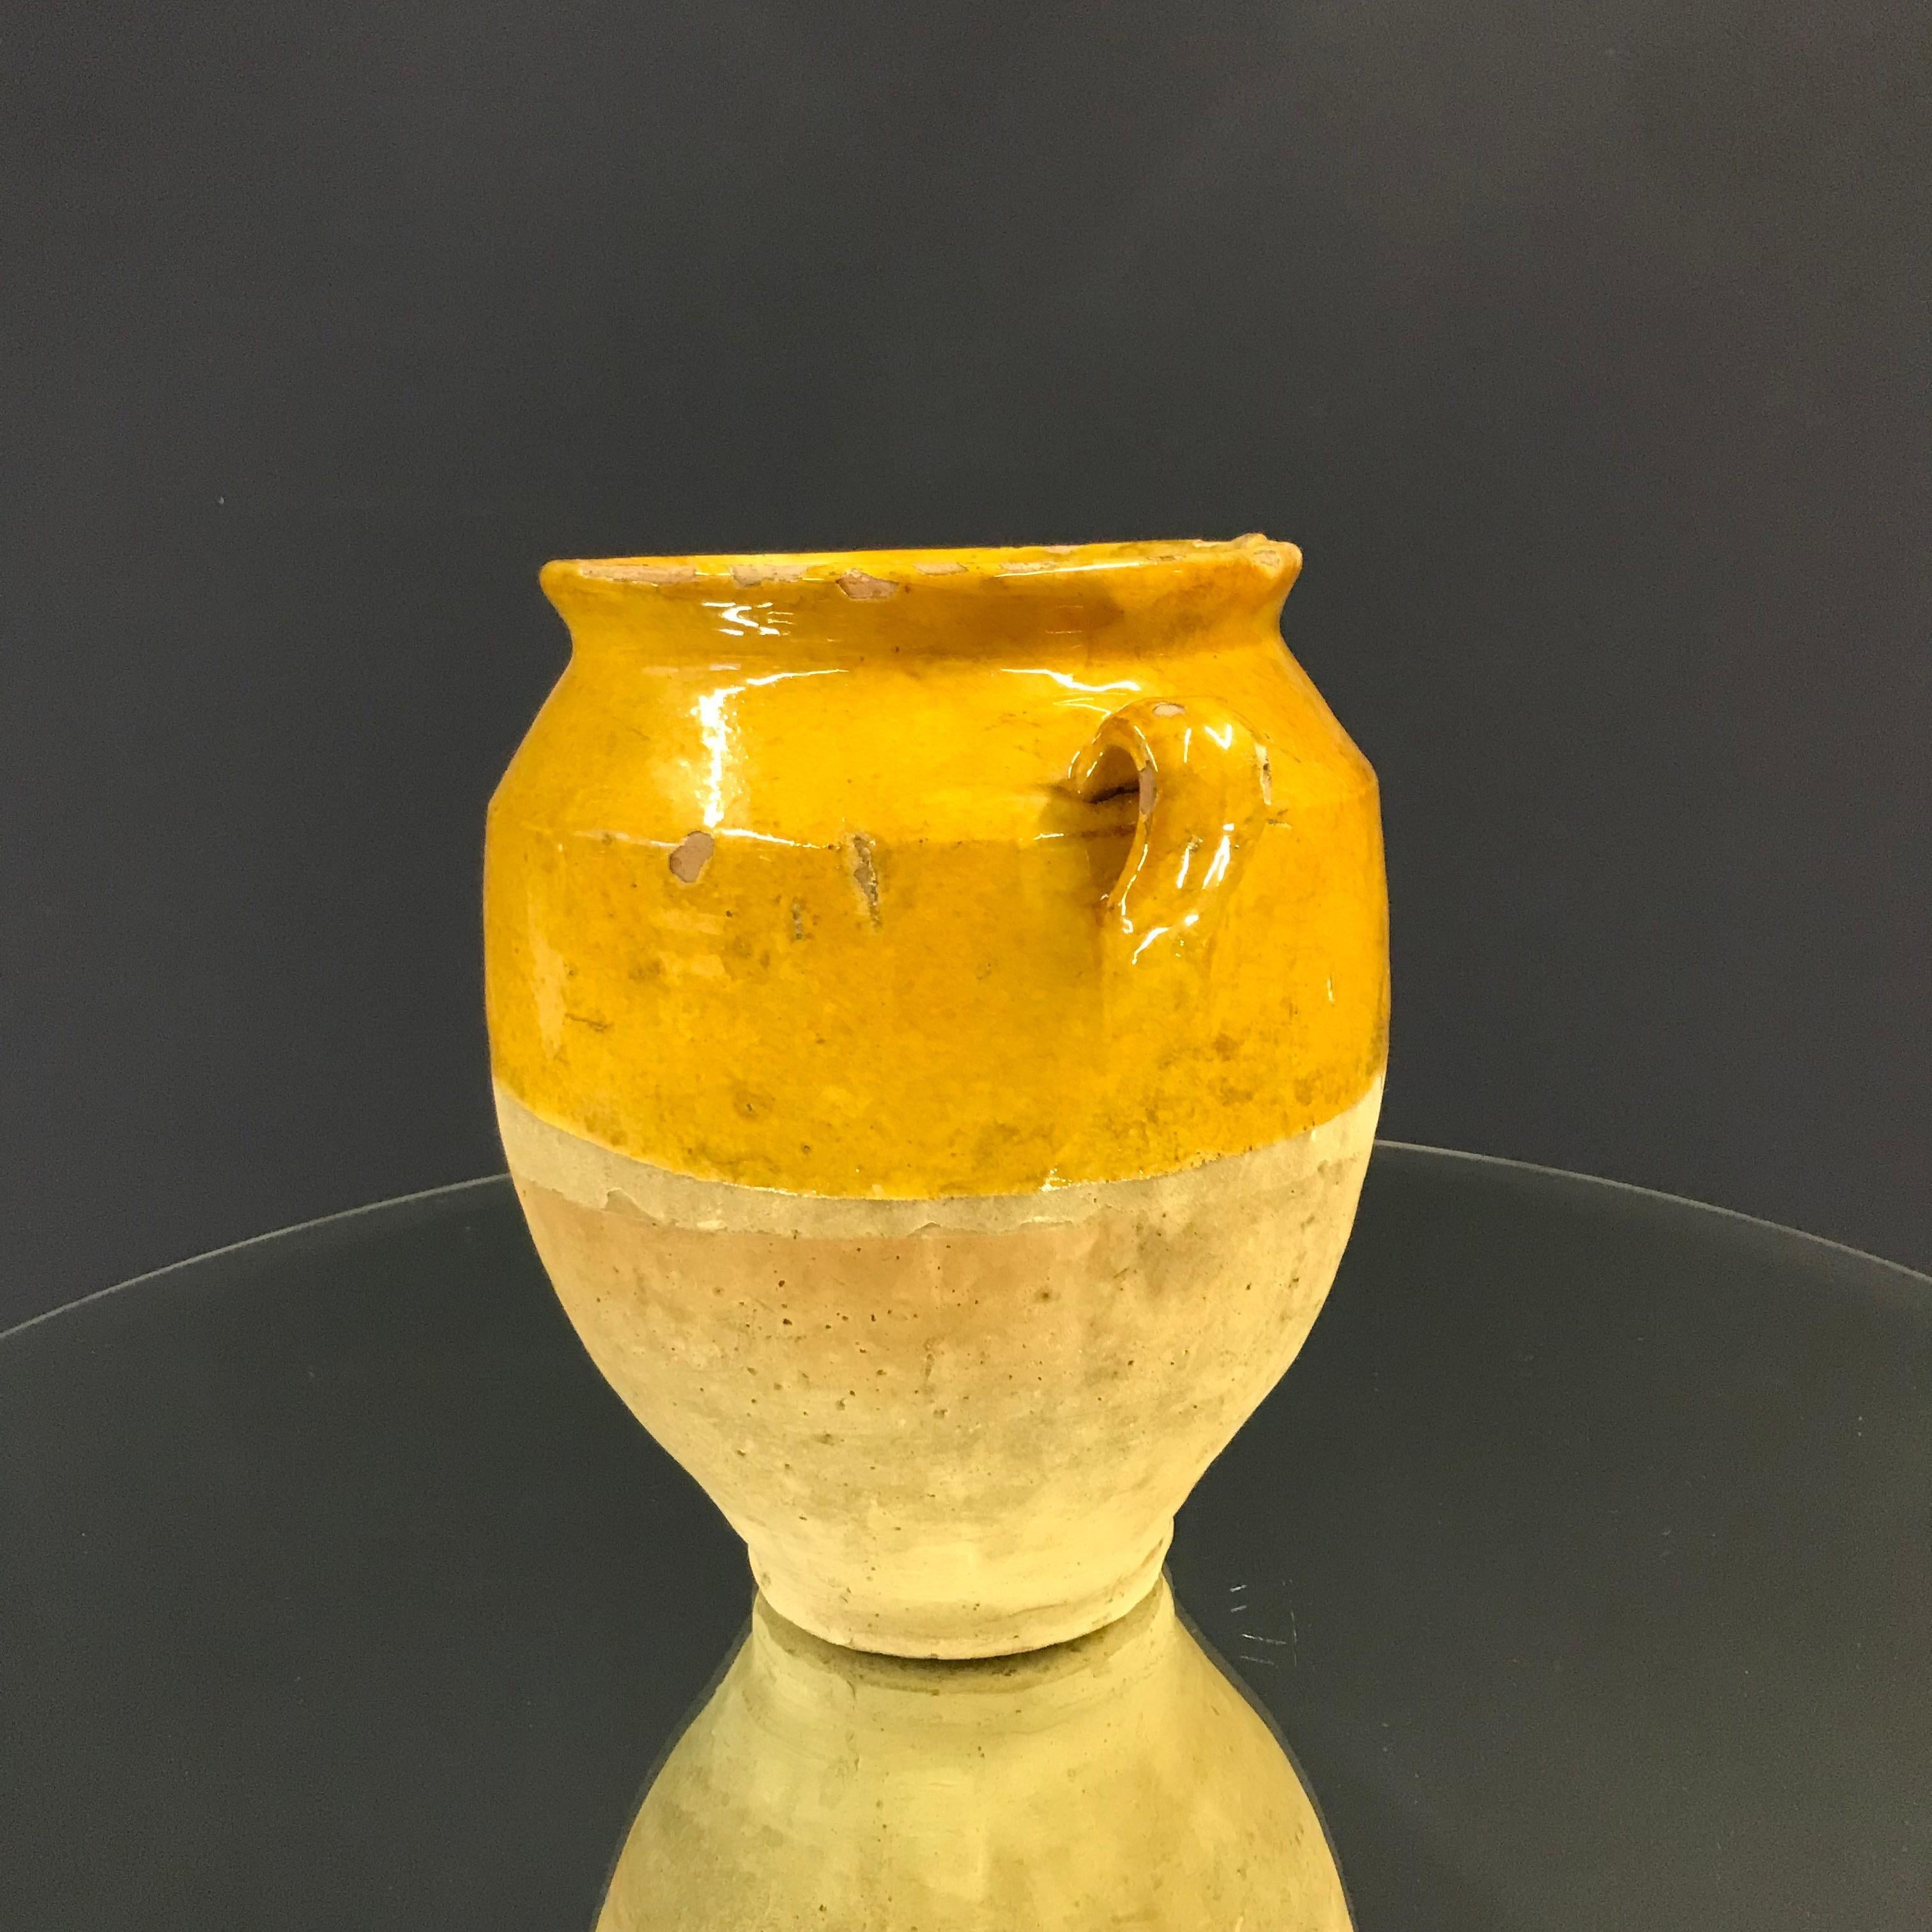 Beautiful small confit jar with its characteristic yellow glaze.
Confit jars were used primarily in the South of France for the preservation of meats such as duck or goose for dishes such as cassoulet or foie gras. The bottom halves were left